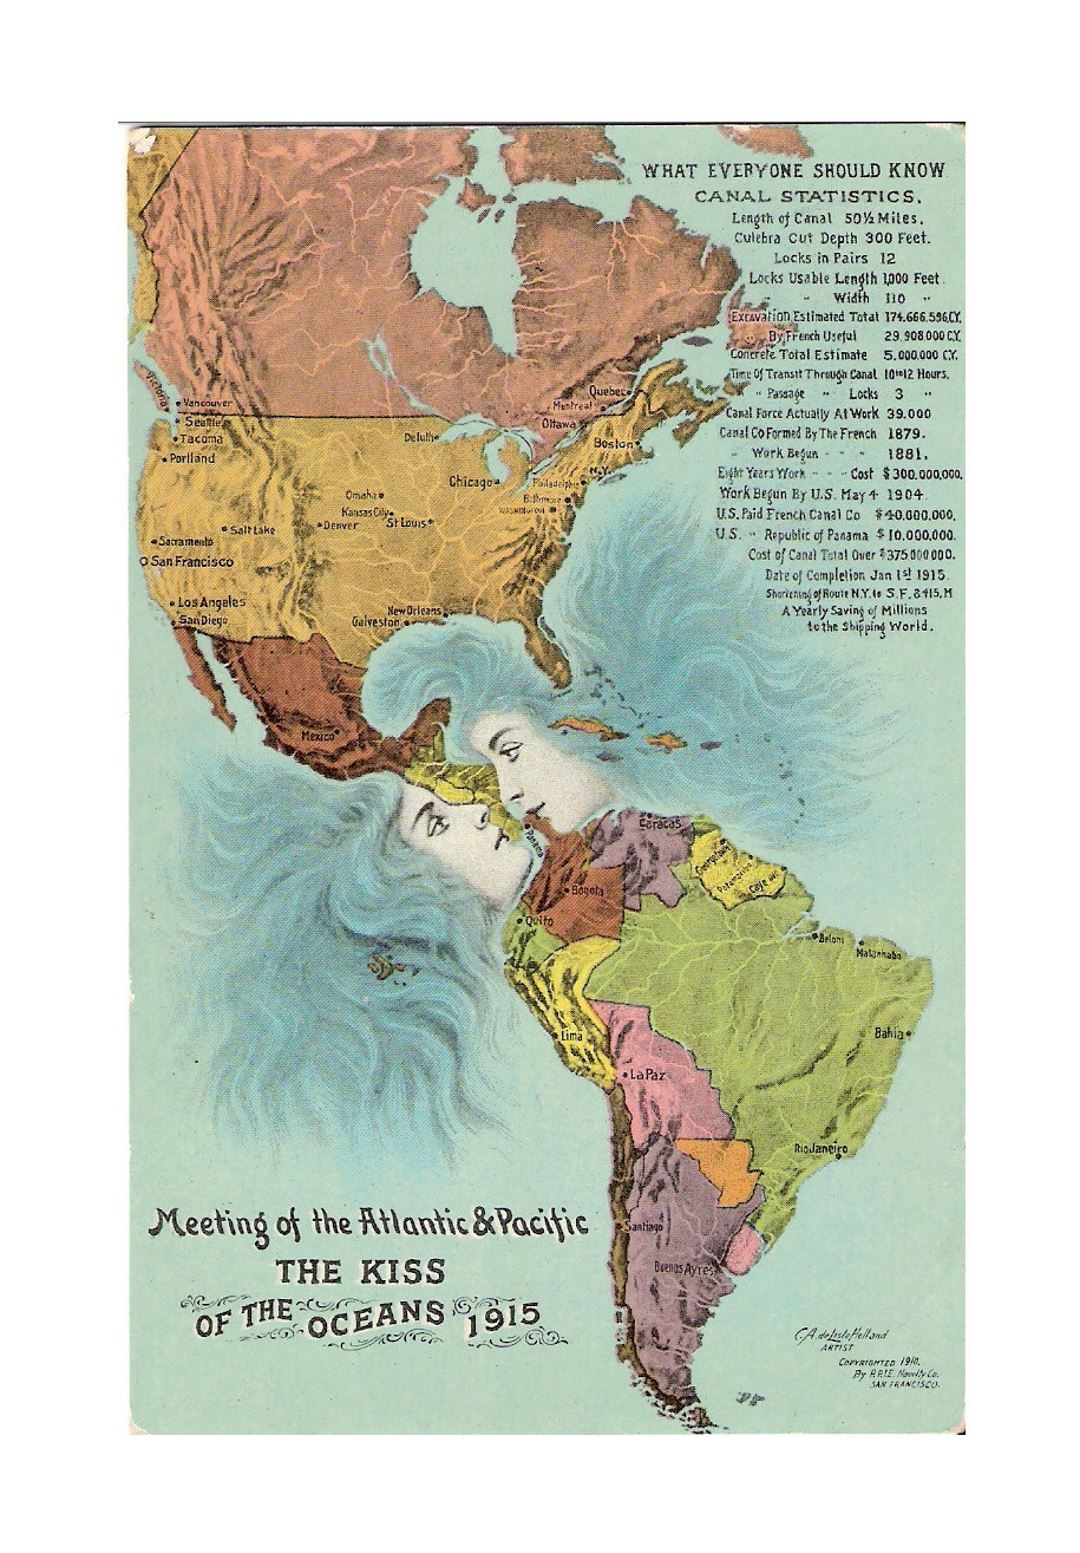 Detailed old kiss of the oceans map of America - 1915